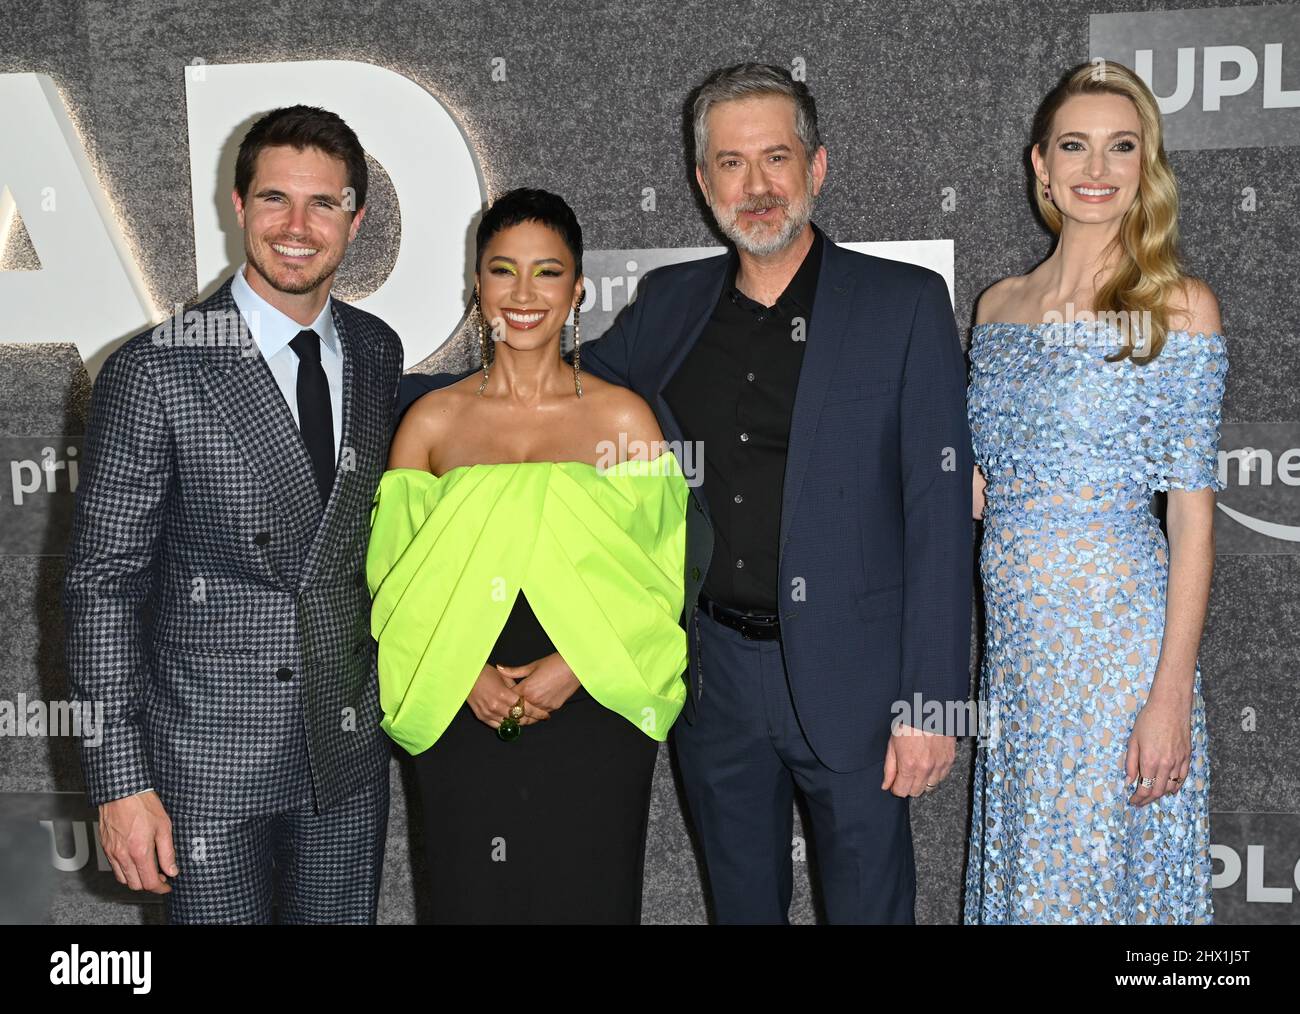 Los Angeles, USA. 08th Mar, 2022. LOS ANGELES, USA. March 08, 2022: Robbie Amell, Andy Allo, Greg Daniels & Allegra Edwards at the premiere for season 2 of the Amazon Prime series 'Upload' at The West Hollywood Edition. Picture Credit: Paul Smith/Alamy Live News Stock Photo